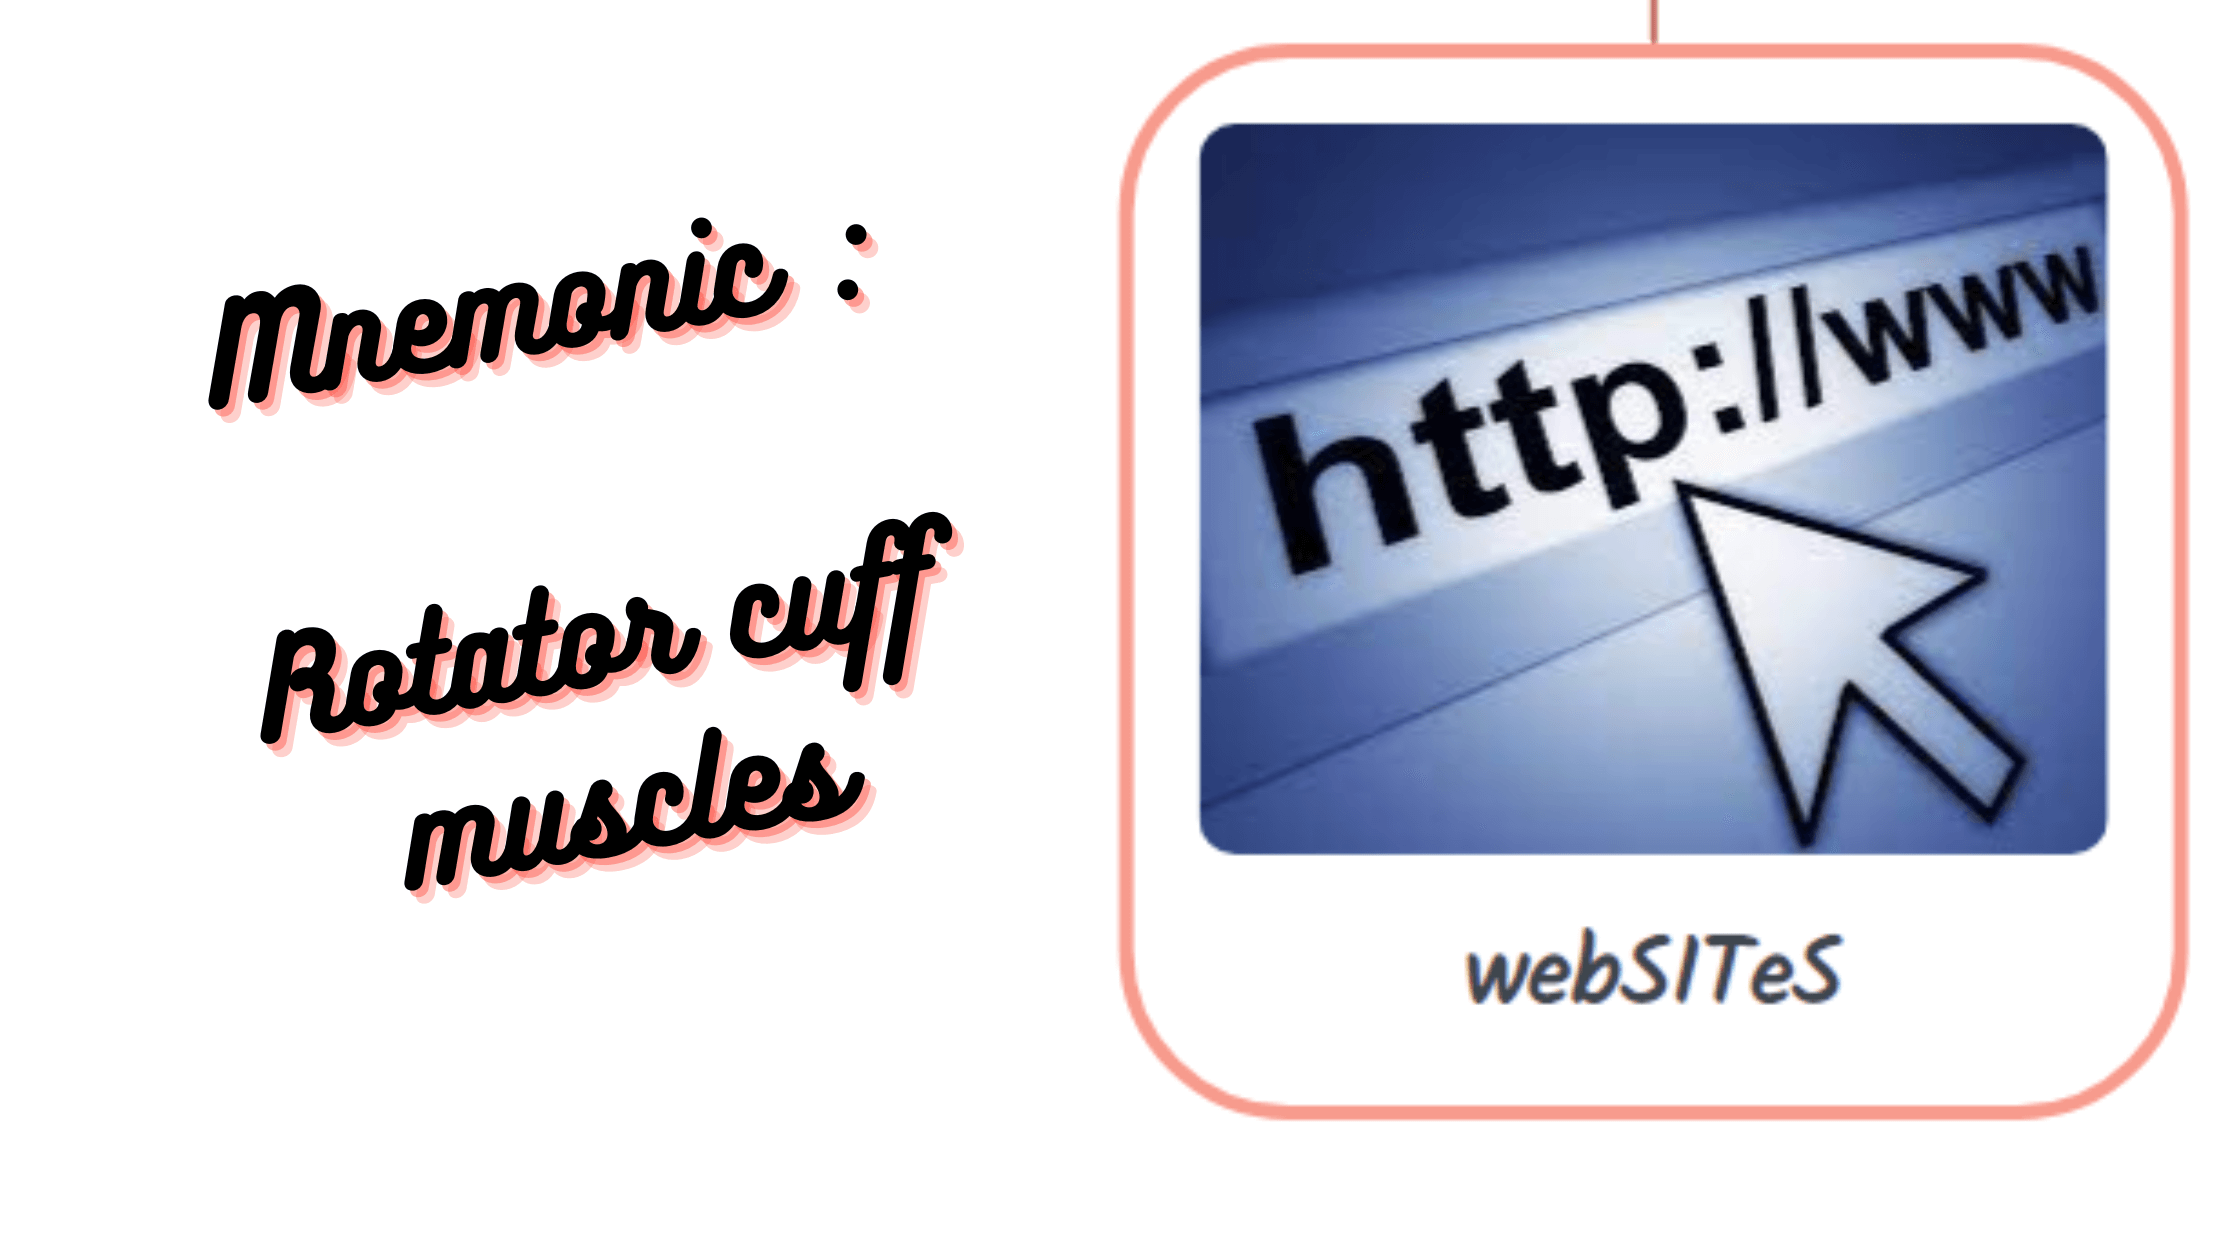 You are currently viewing Mnemonic : Rotator cuff muscles